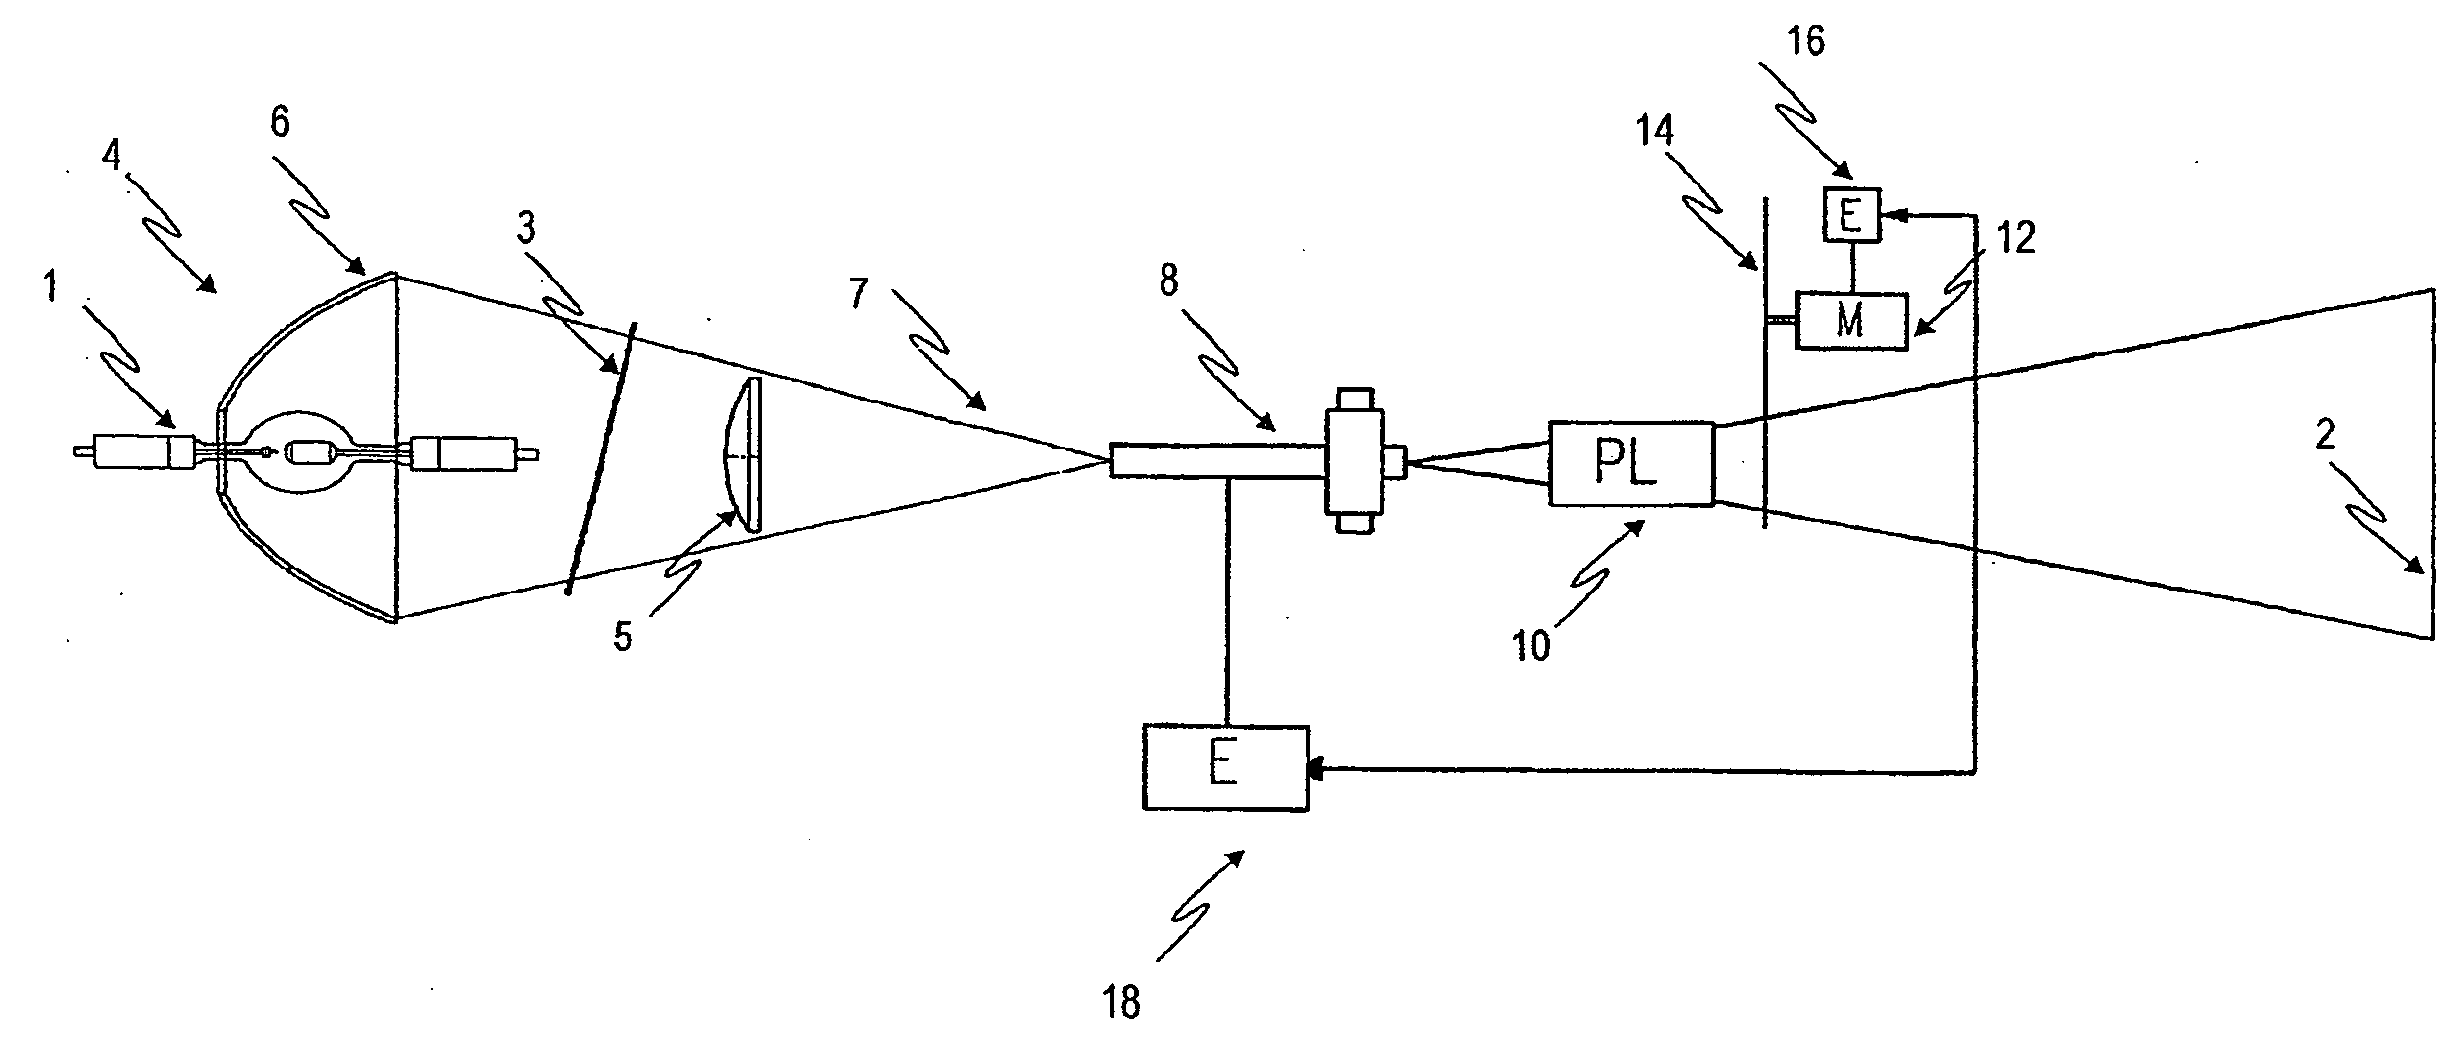 Device and method for large-screen projection of digital images onto a projection screen